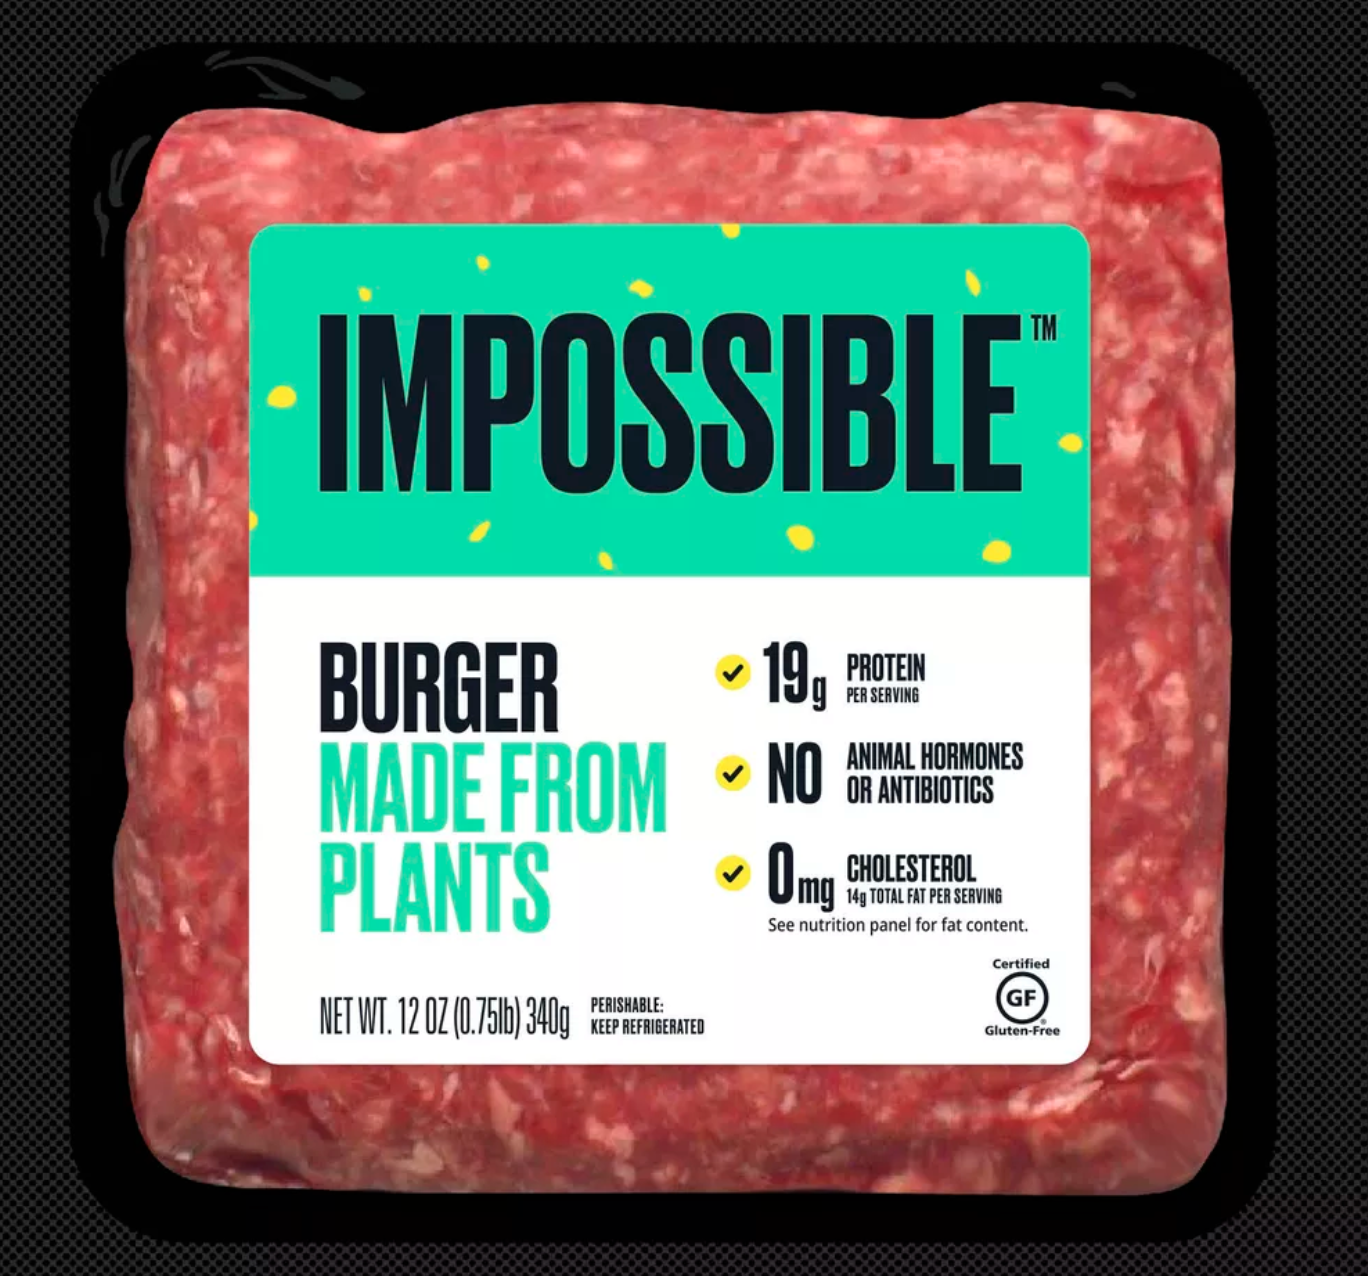 Impossible foods ipo news